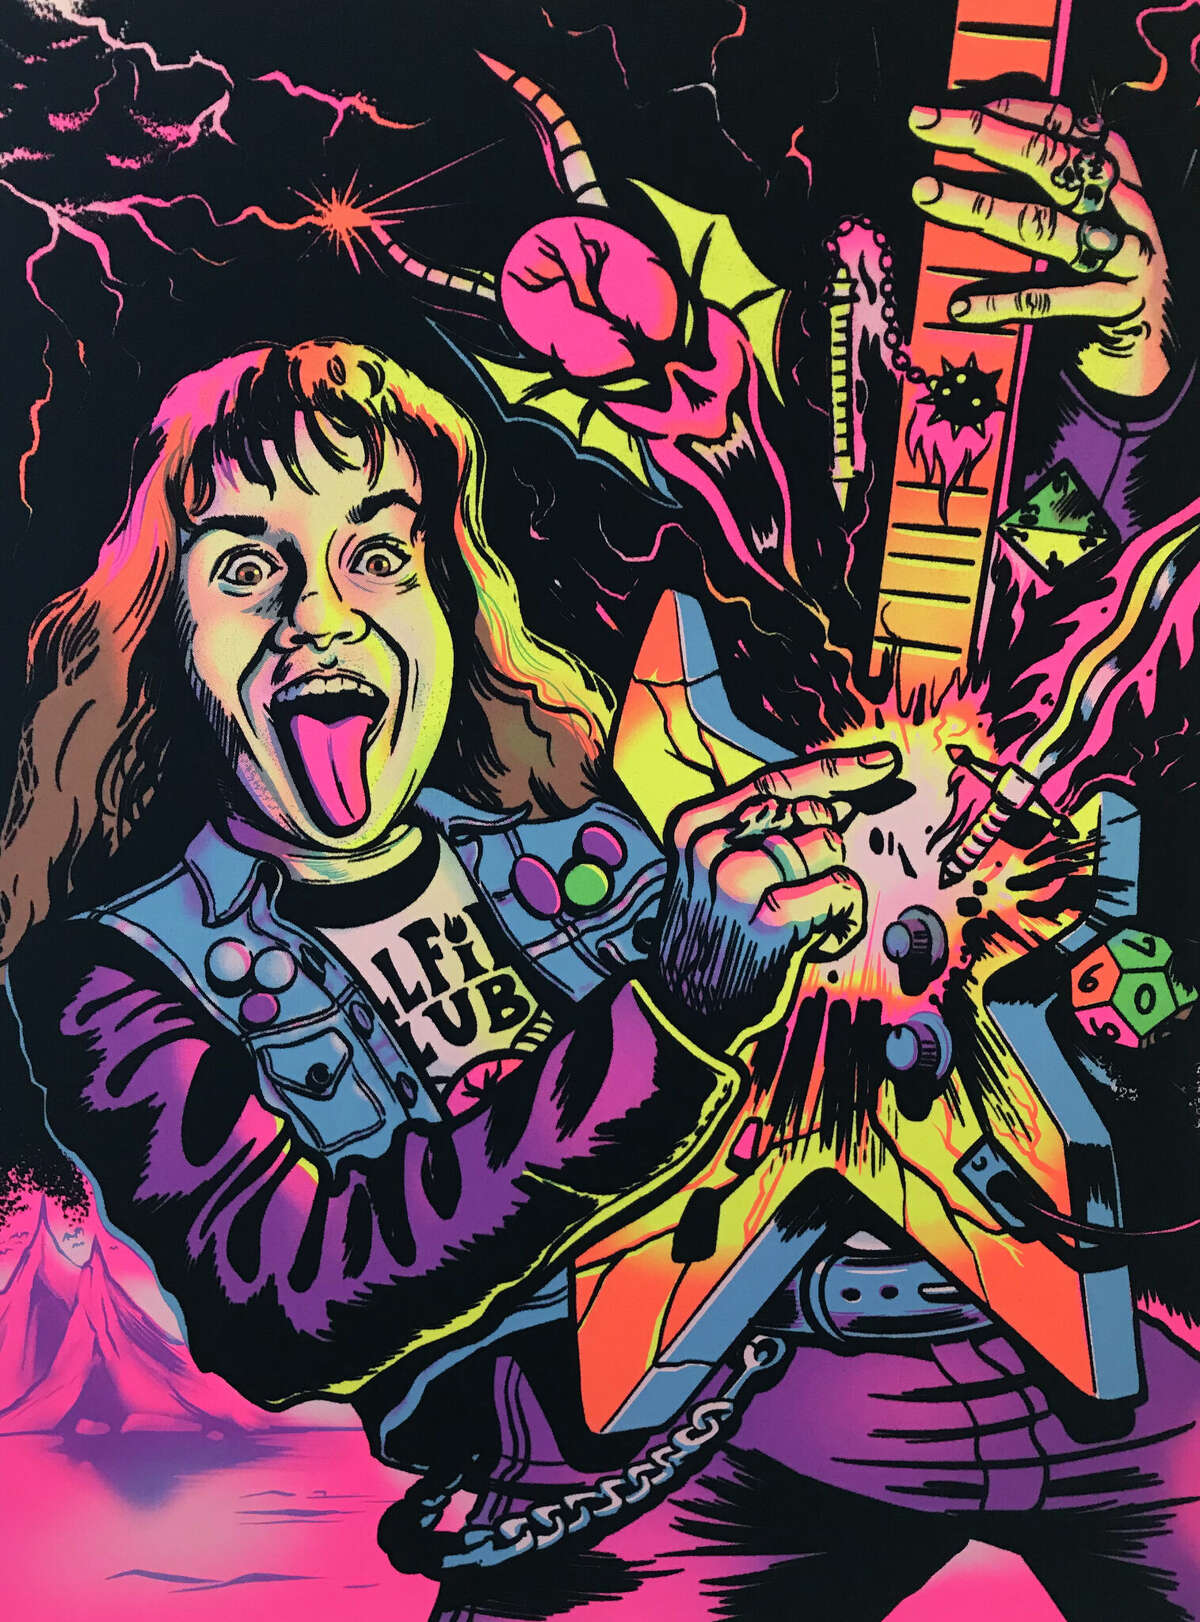 A black-light poster of Eddie Munson from "Stranger Things" designed by artist Marty "Riet" McEwen and printed by Cat Palace Screen Printing in Selma.